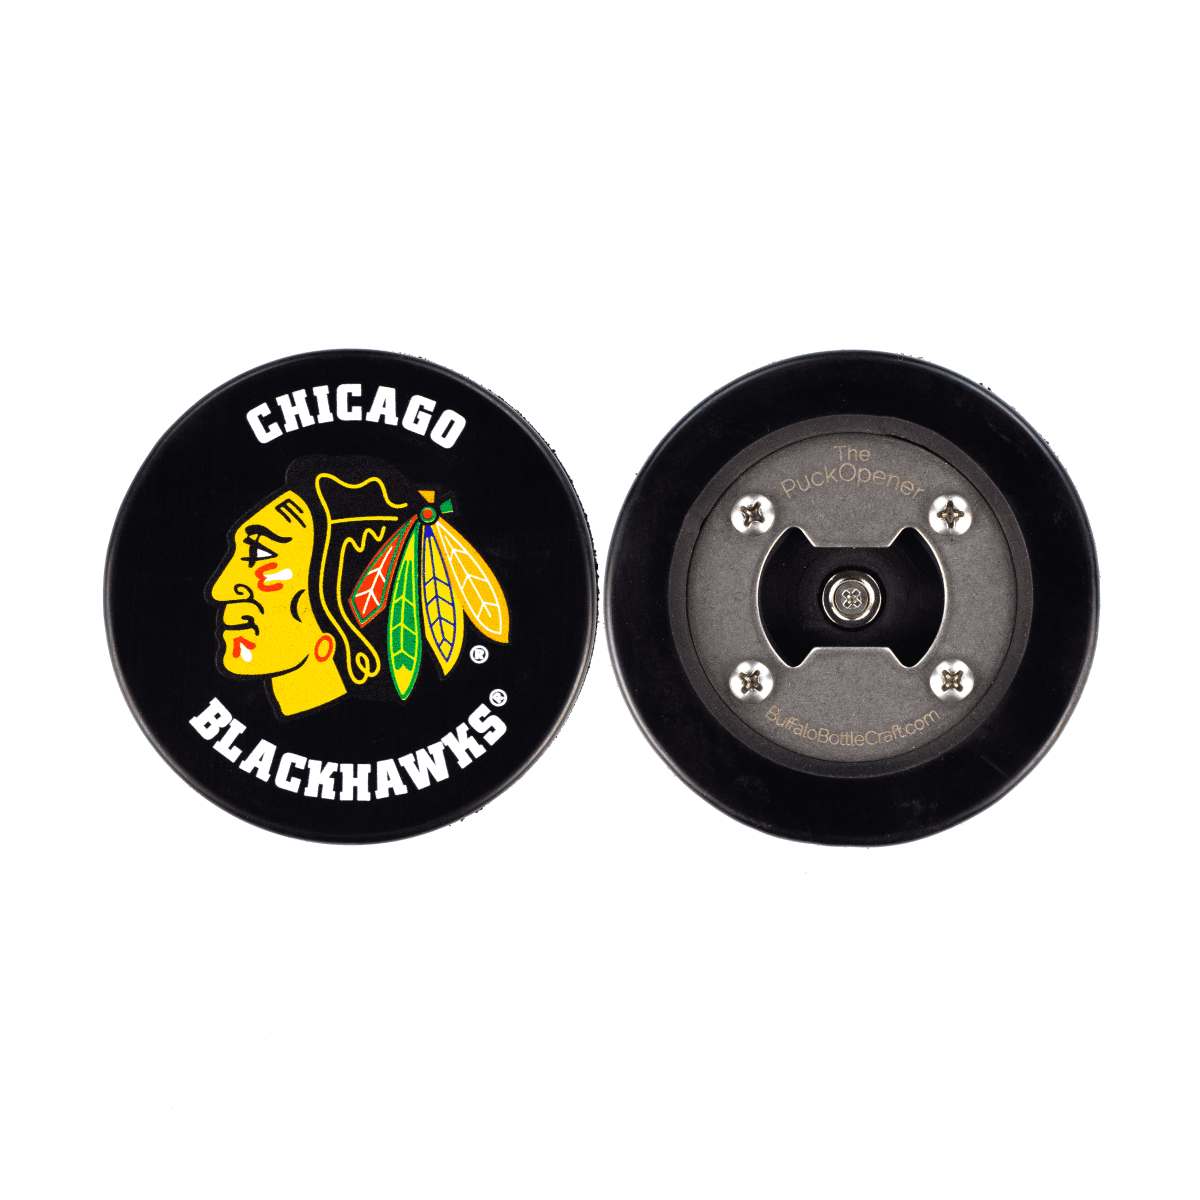 Chicago Blackhawks  Bottle Opener made from a Real Hockey Puck